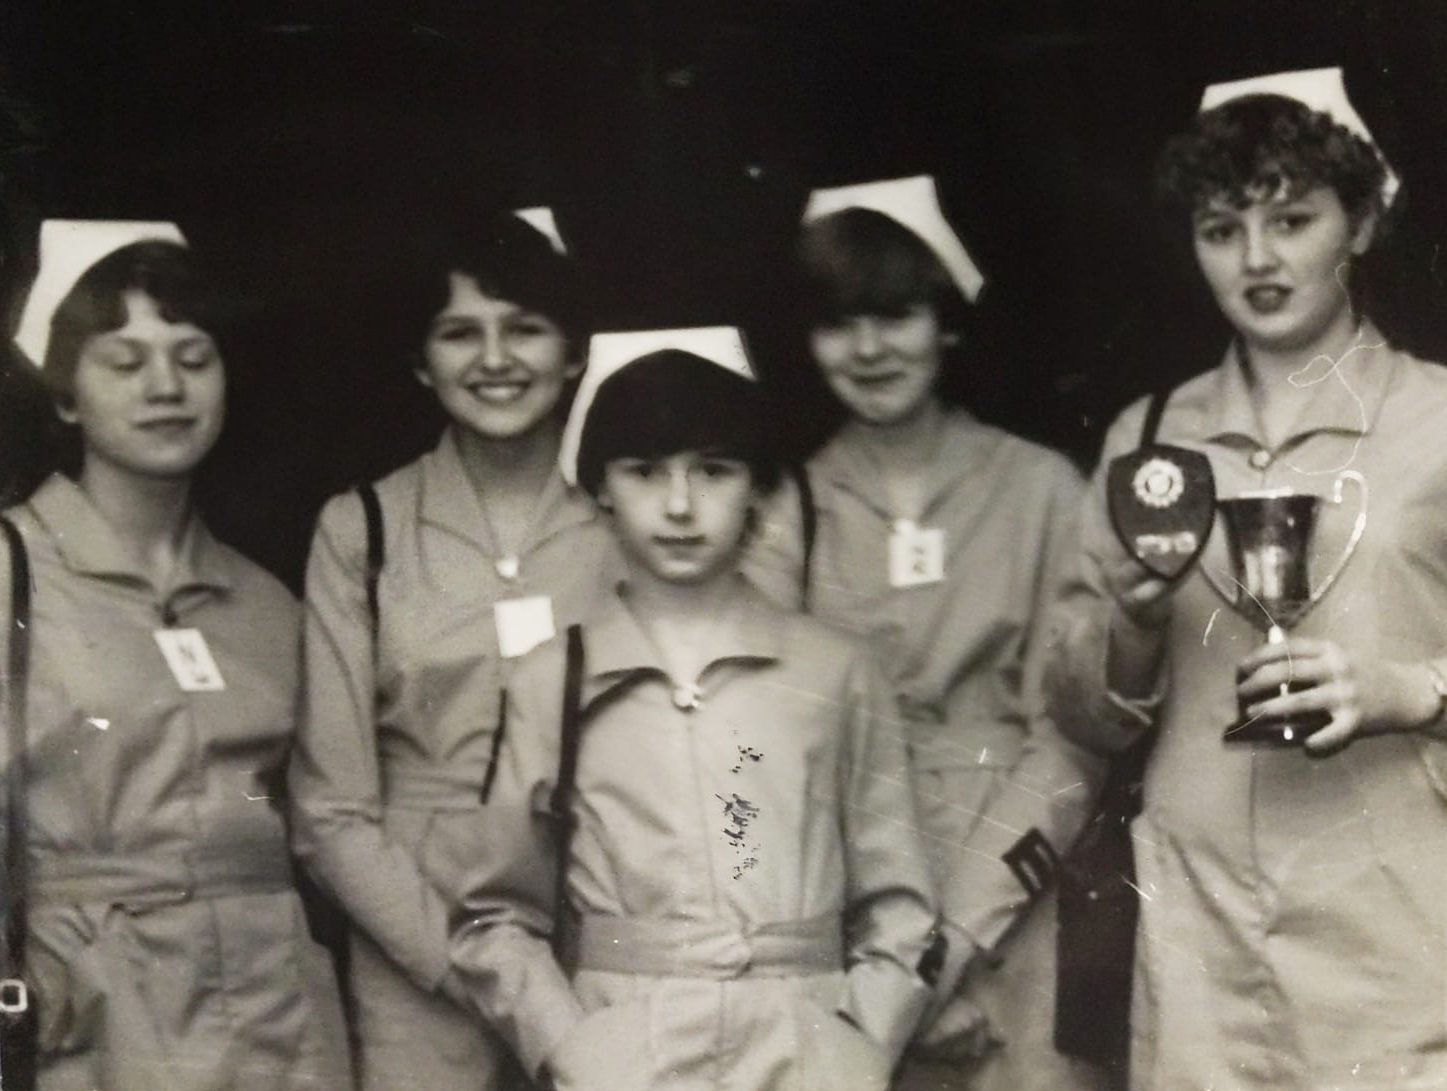 Black and white photograph of five female nursing Cadets in uniform standing in a row. The girl on the end is holding two trophies.